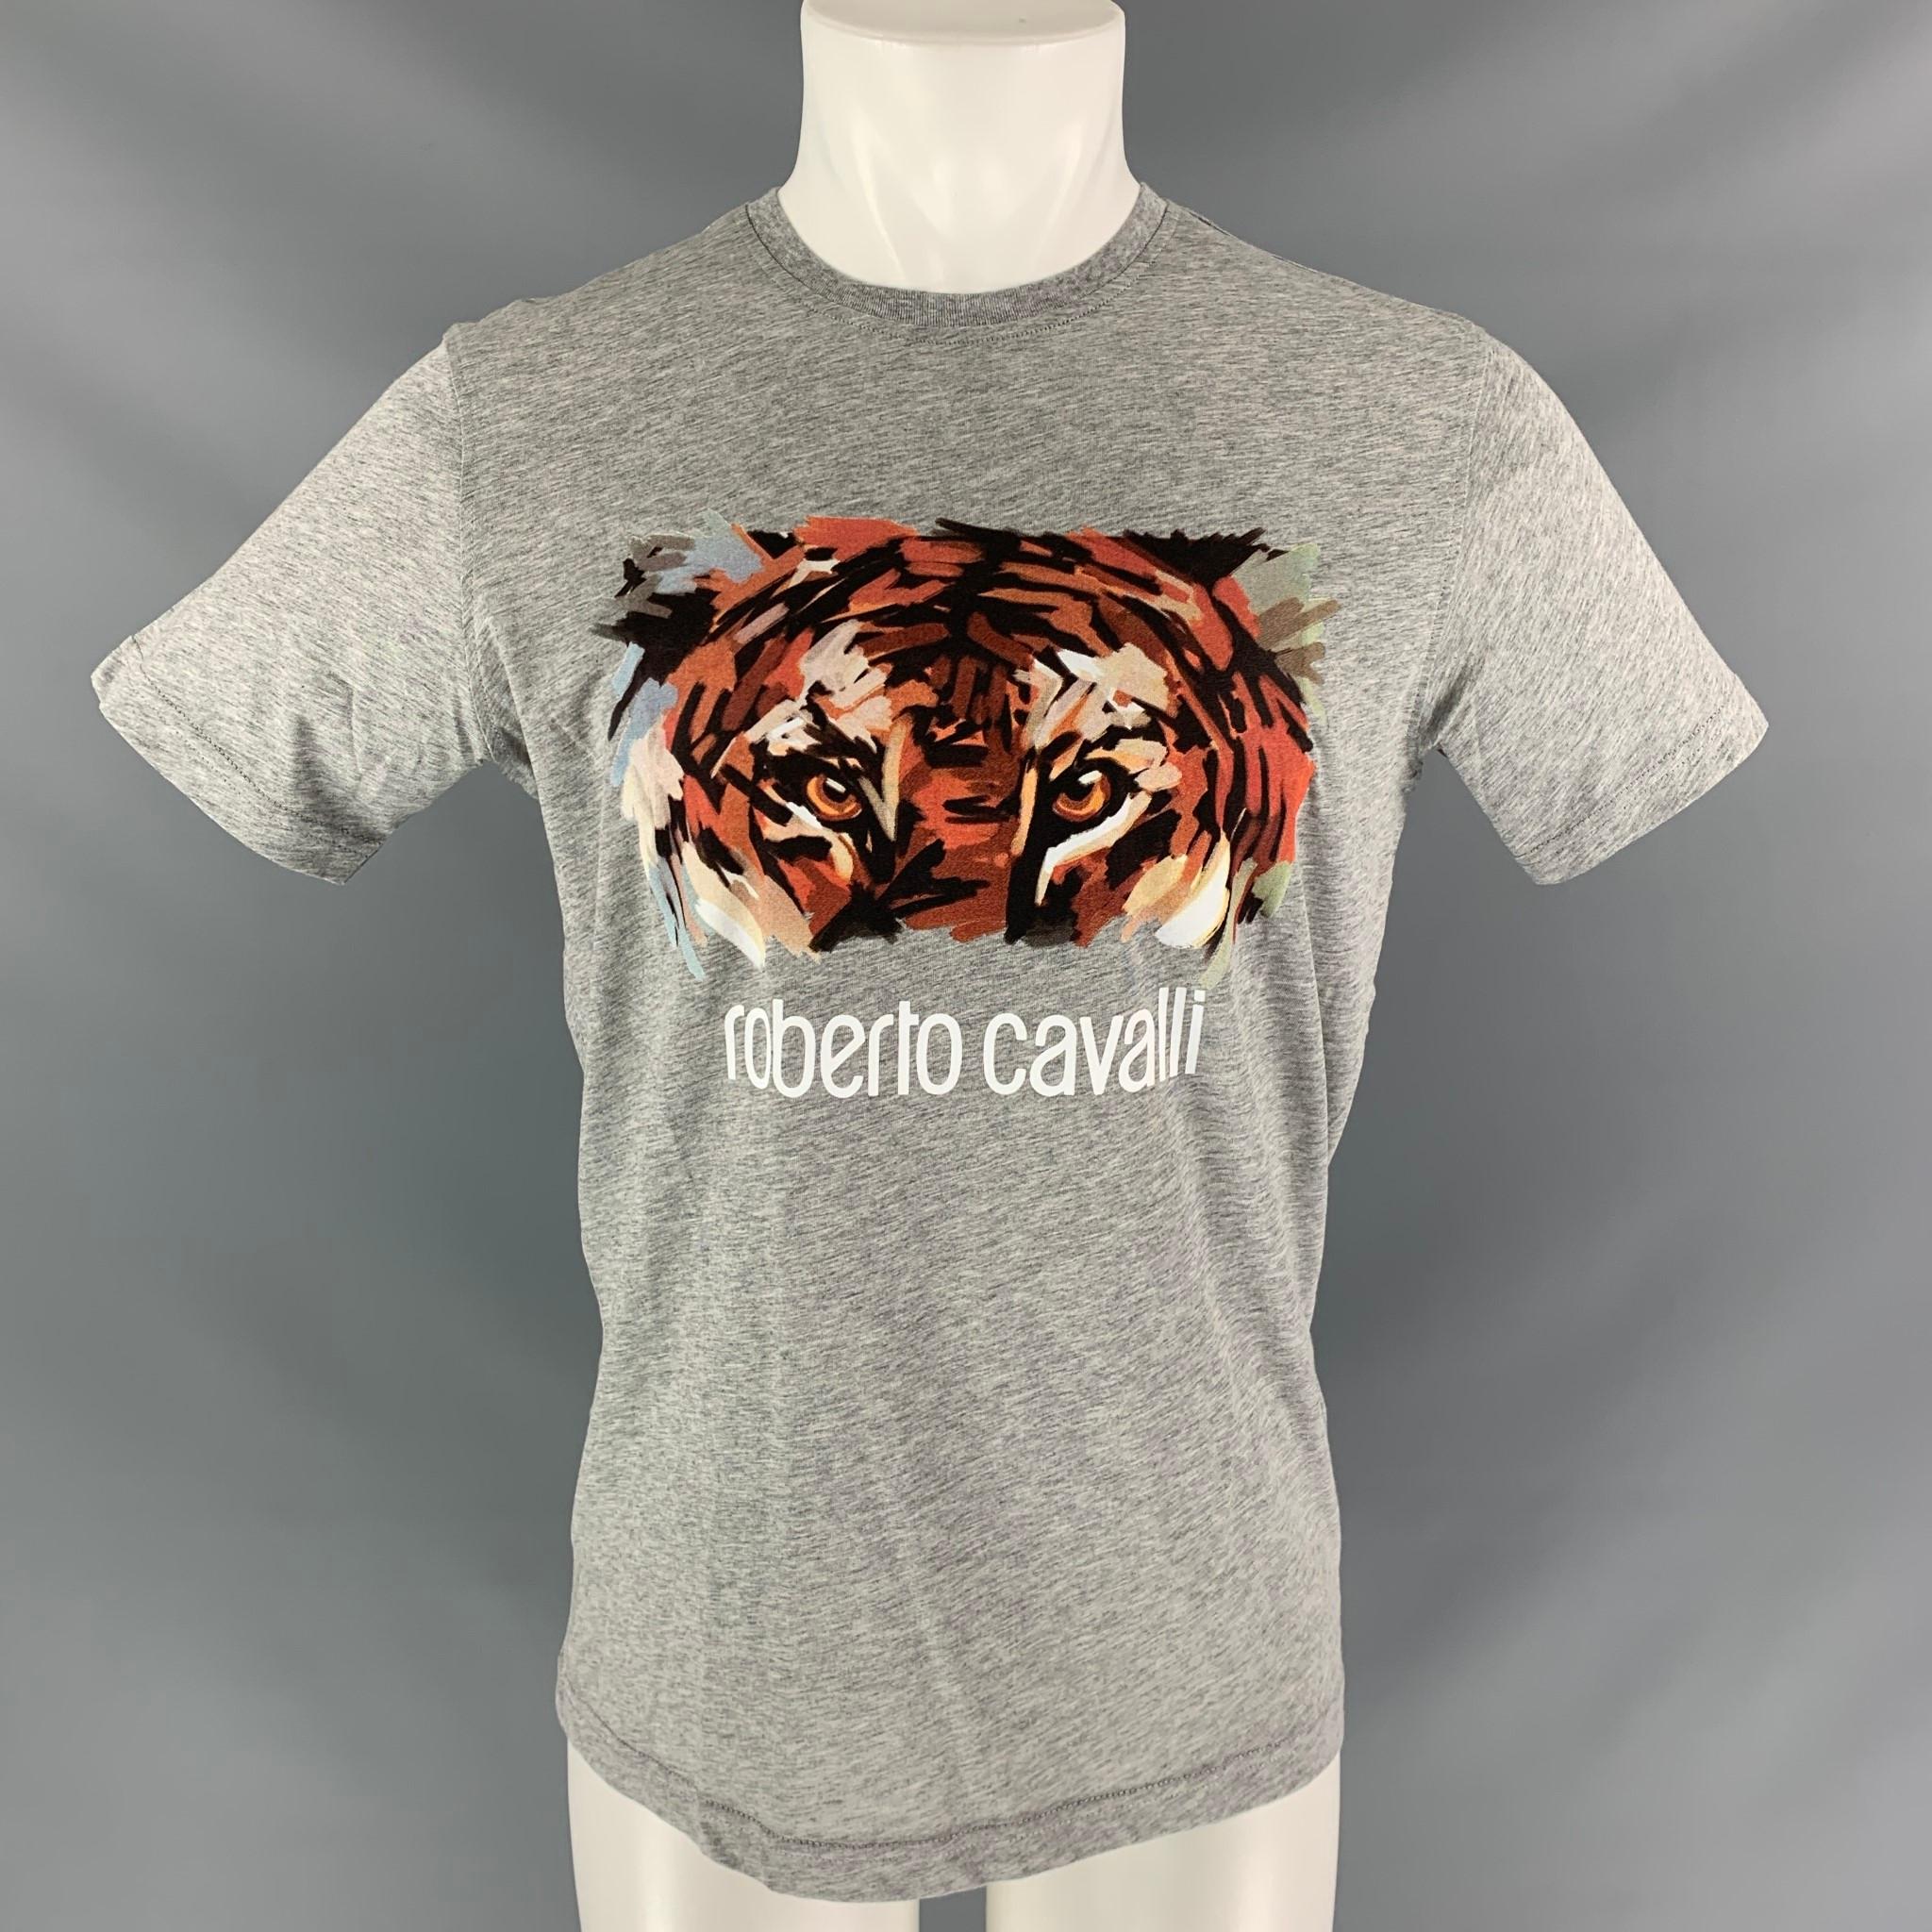 ROBERTO CAVALLI short sleeve t-shirt comes in heather grey cotton, artistic tiger eyes graphic art at center front and a round collar.

New with Tag.
Marked: M

Measurements:

Shoulder: 18 in
Chest: 43 in
Sleeve: 8 in
Length: 28 in